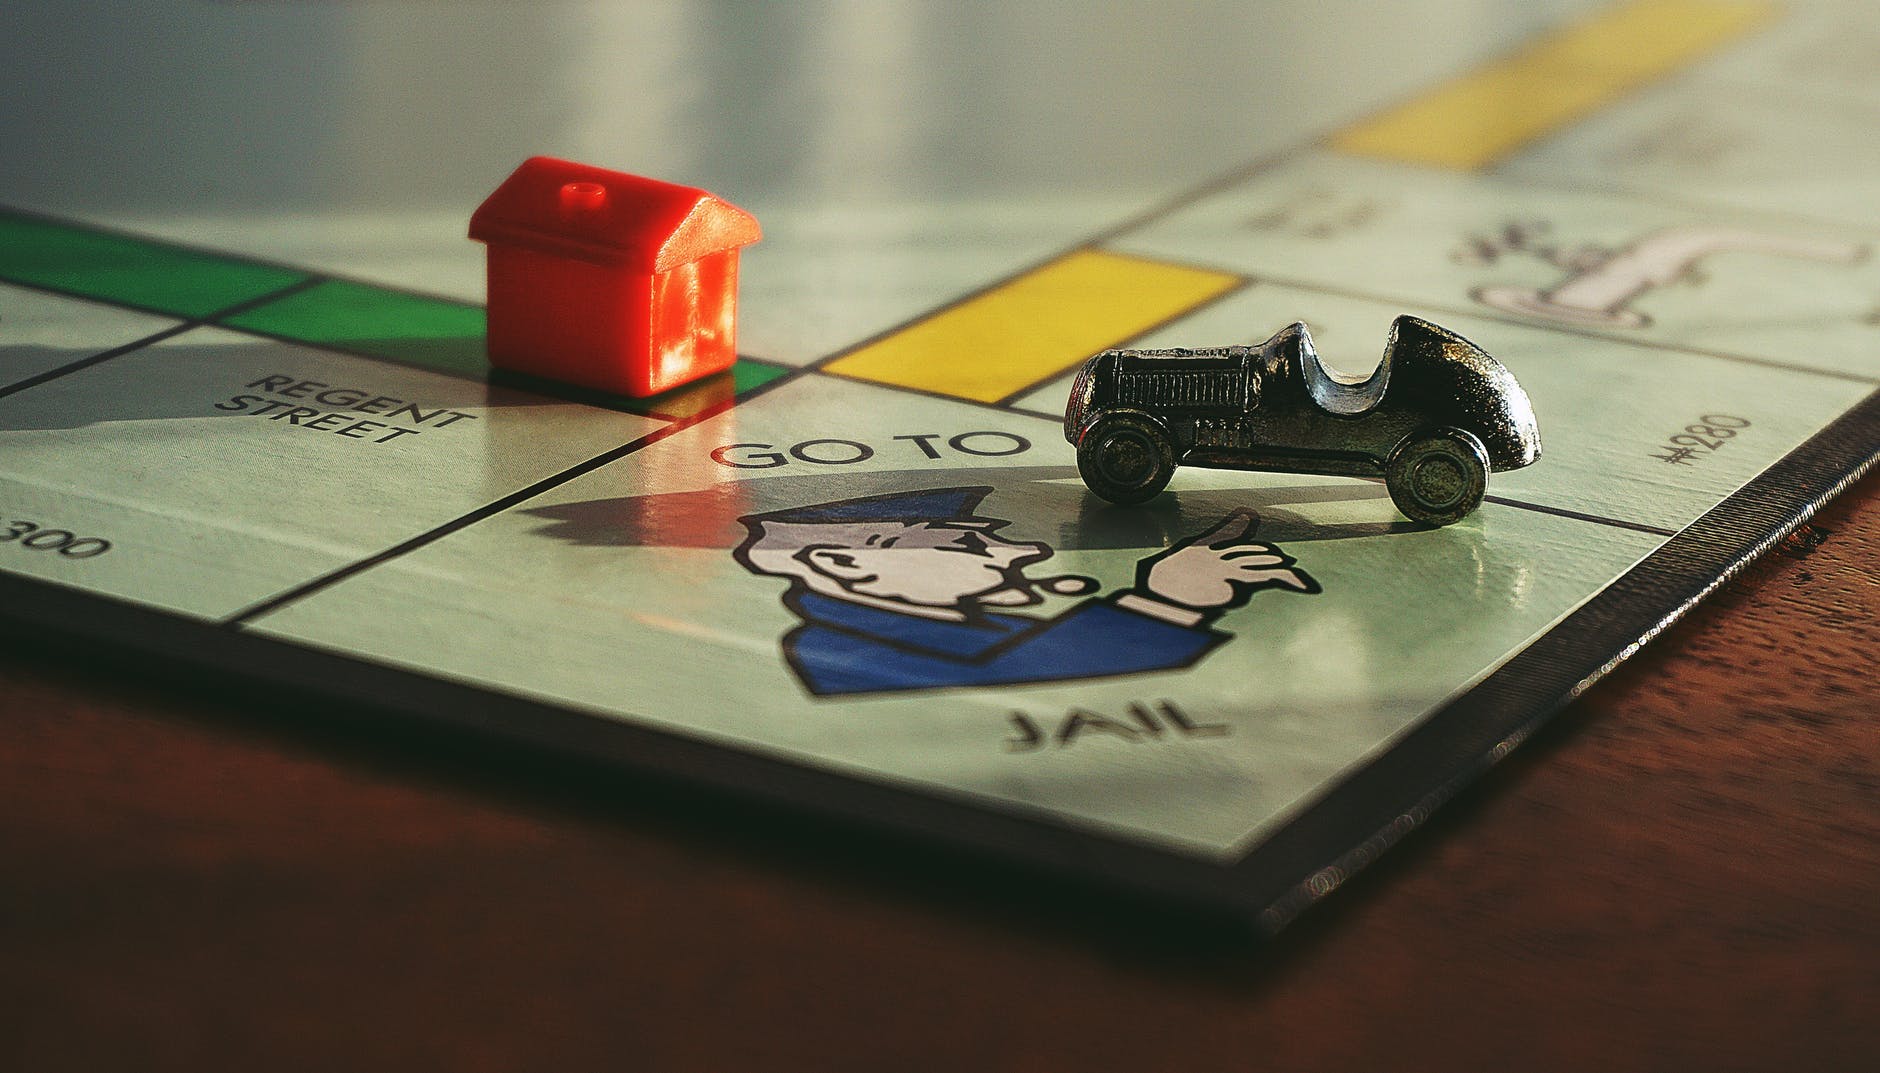 Photo of monopoly board game showing the car going to jail